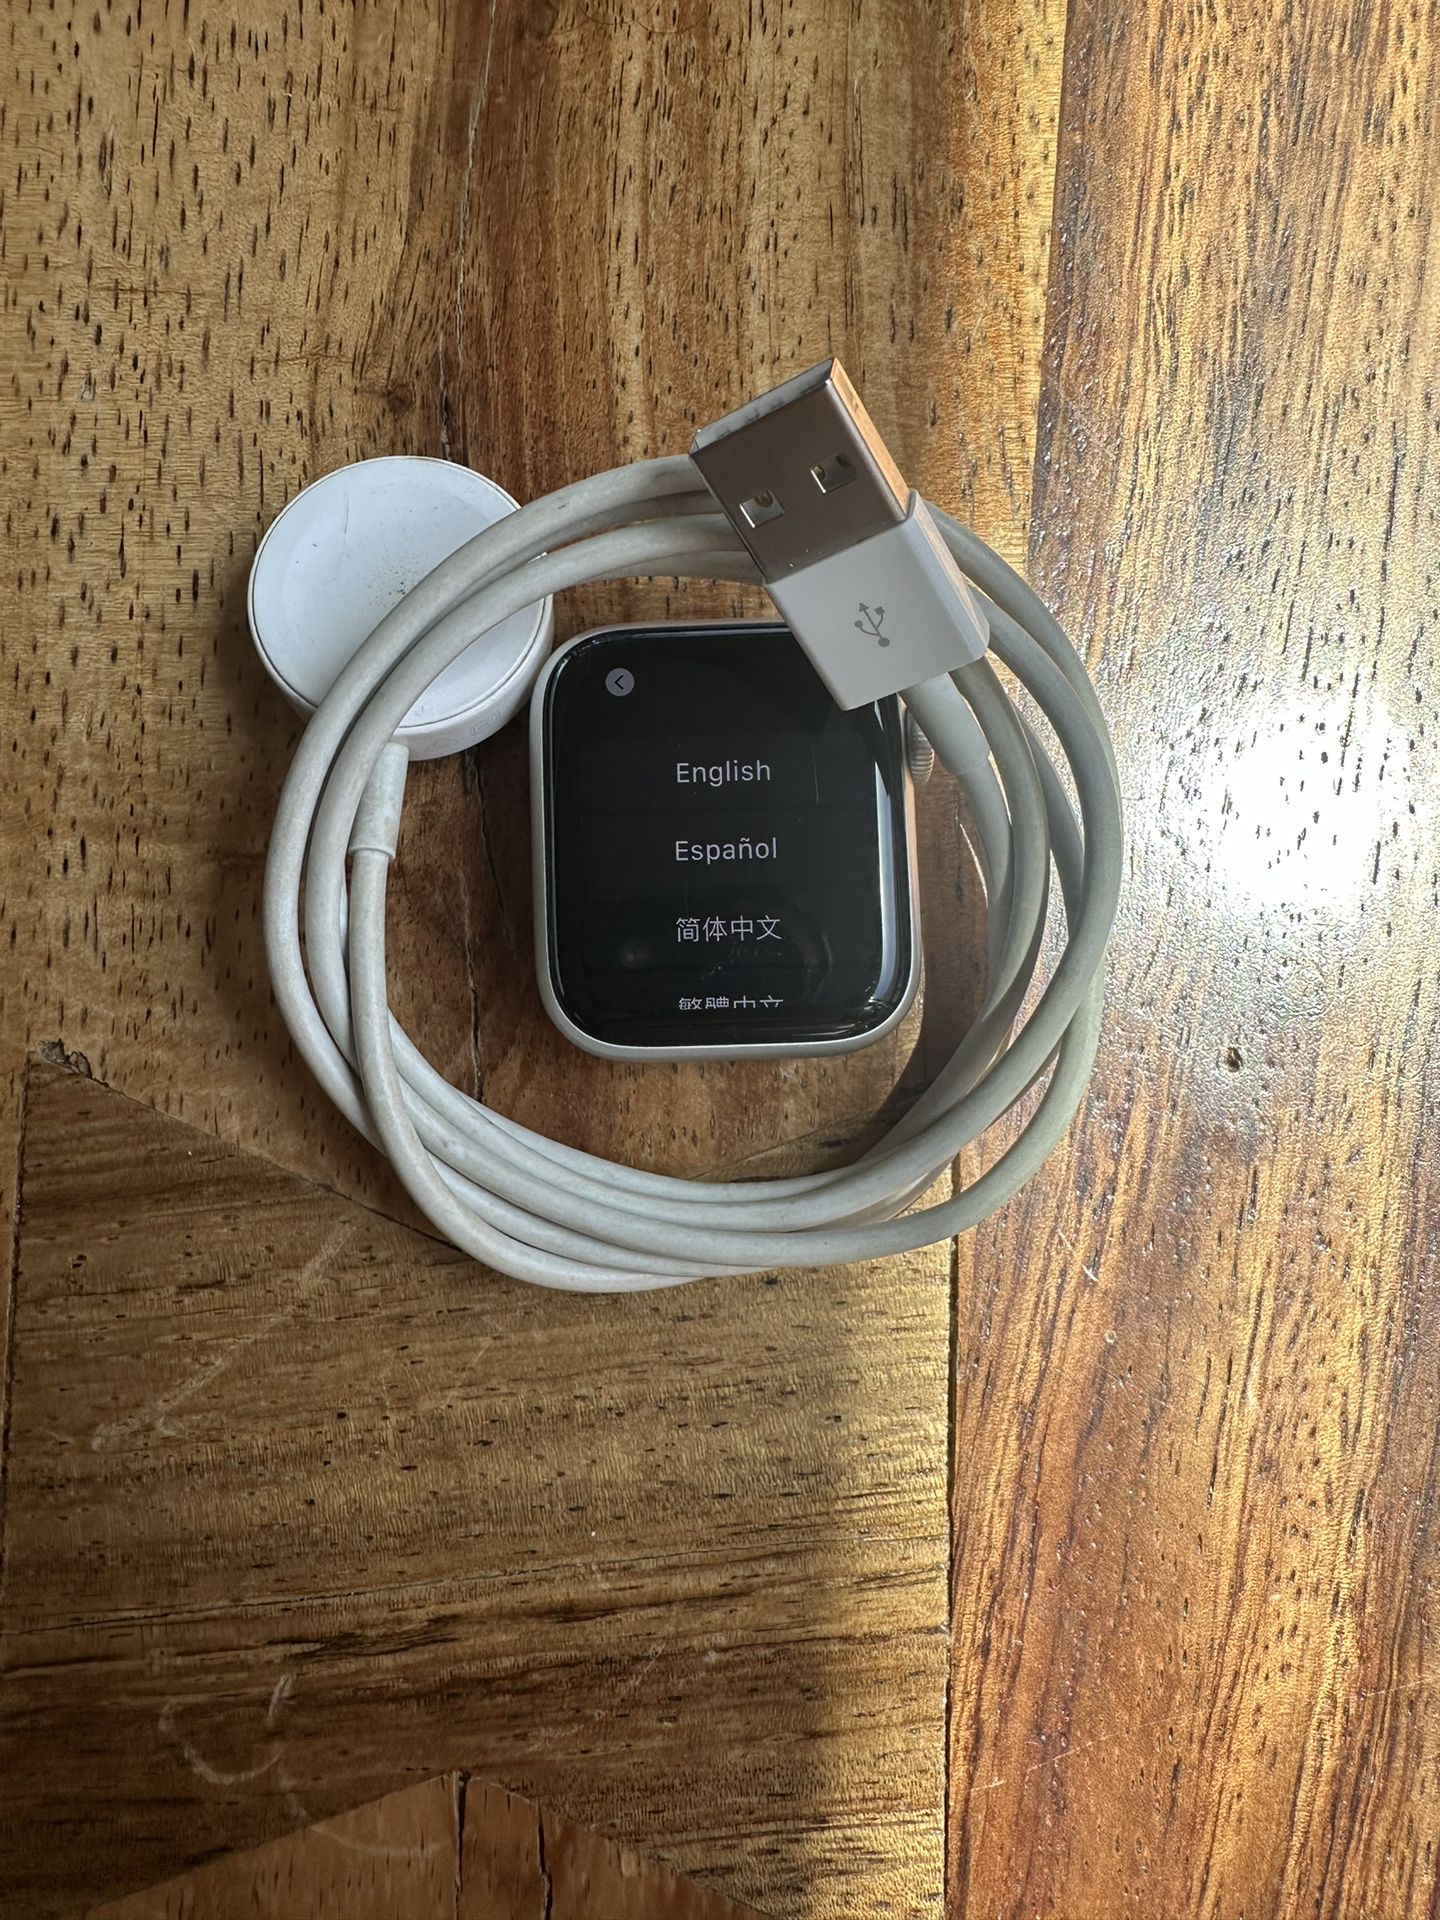 S4 Apple Watch With Cellular +GPS